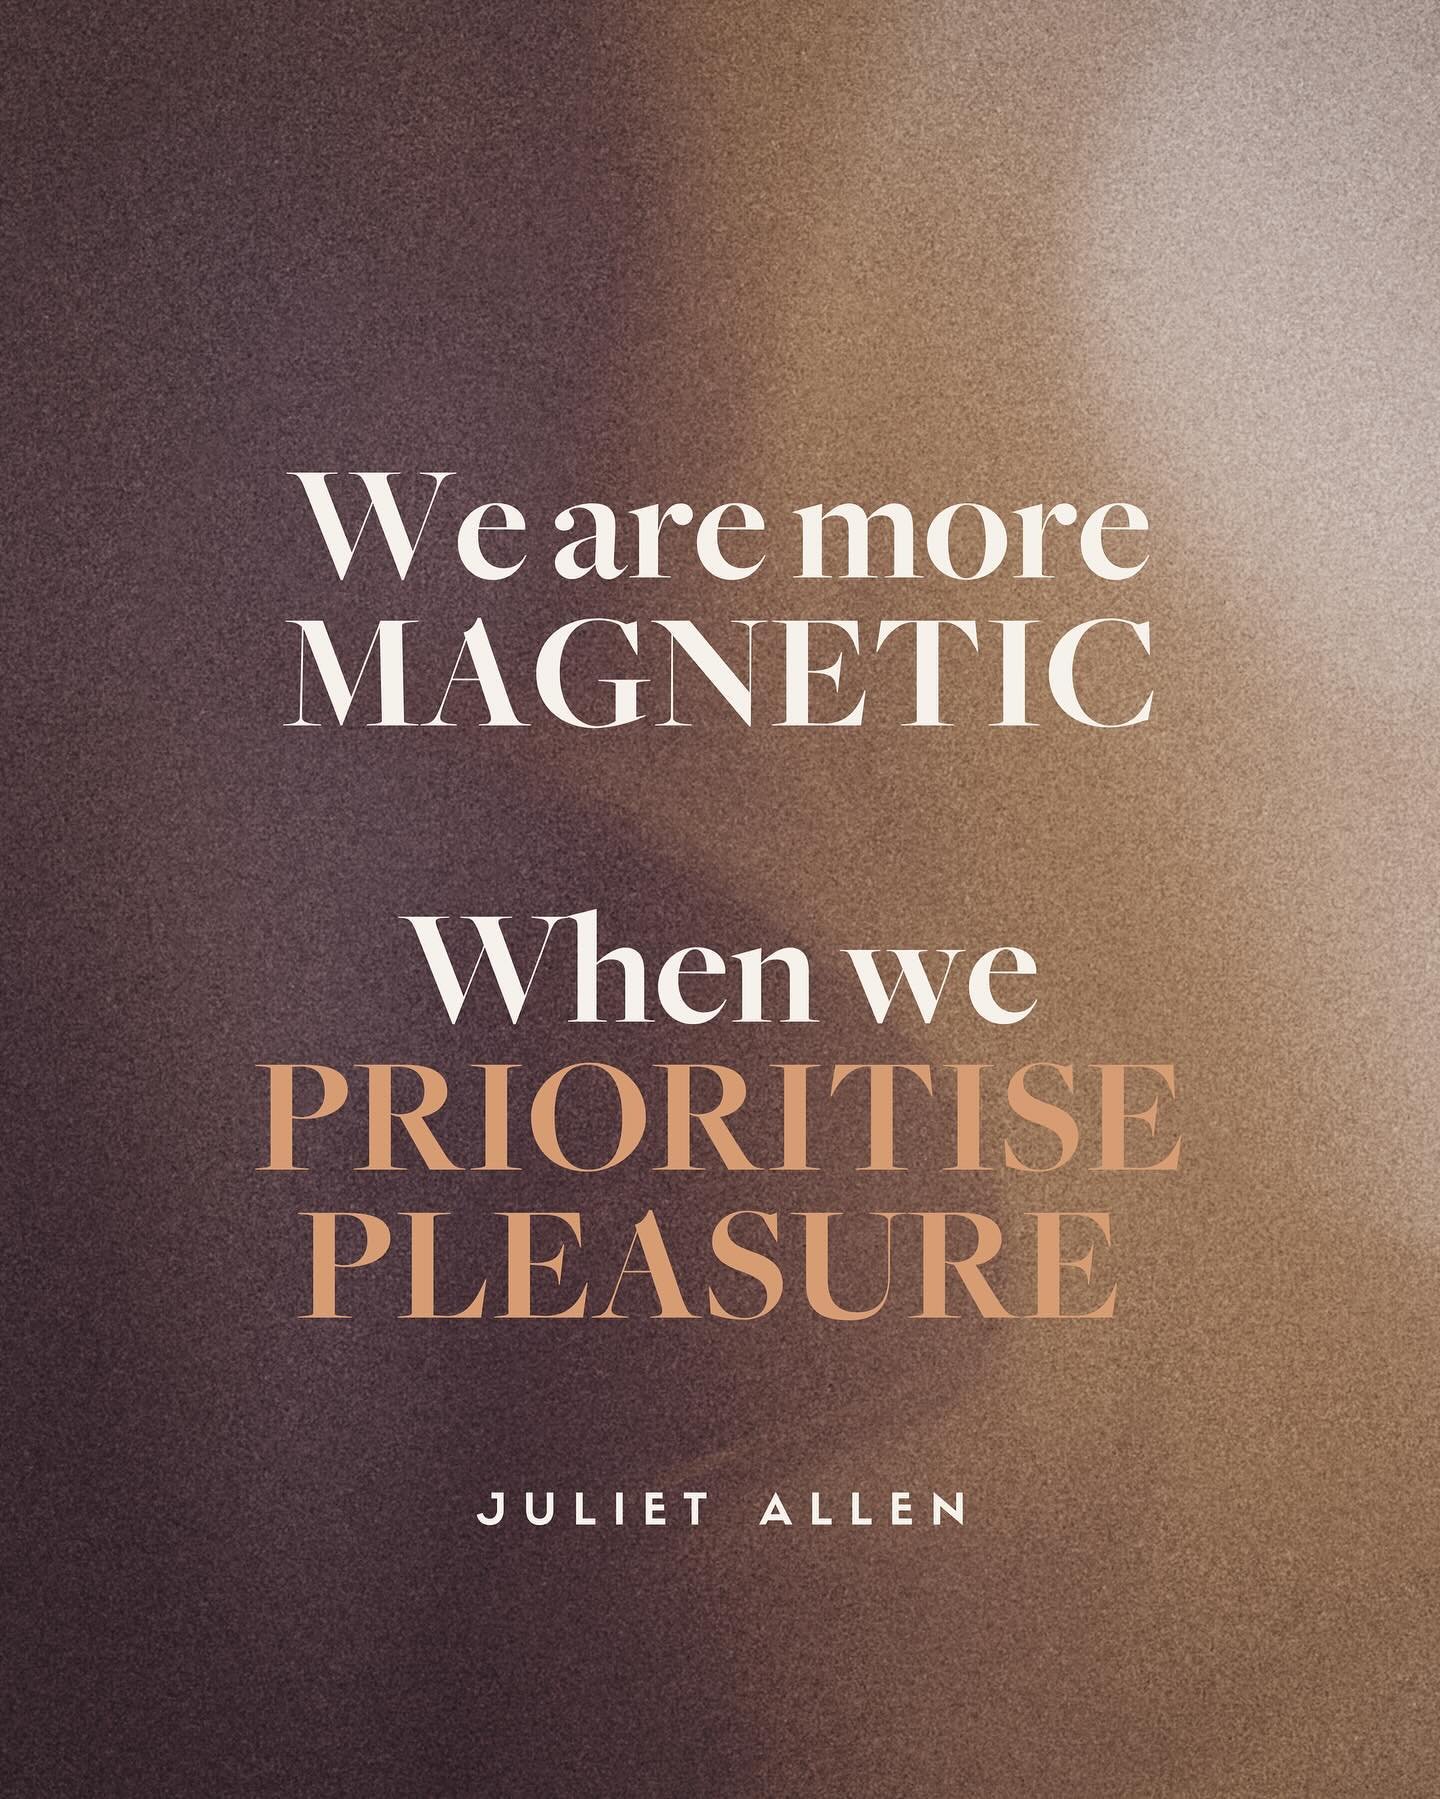 Magnetism isn&rsquo;t rocket science! Once we learn the 3 foundations of magnetism, it&rsquo;s relatively easy to cultivate and radiate that energy in all areas of life 🧲🔥💃🏻 

Join my new FREE Masterclass - The Art of S^xual Magnetism 💫 June 1st